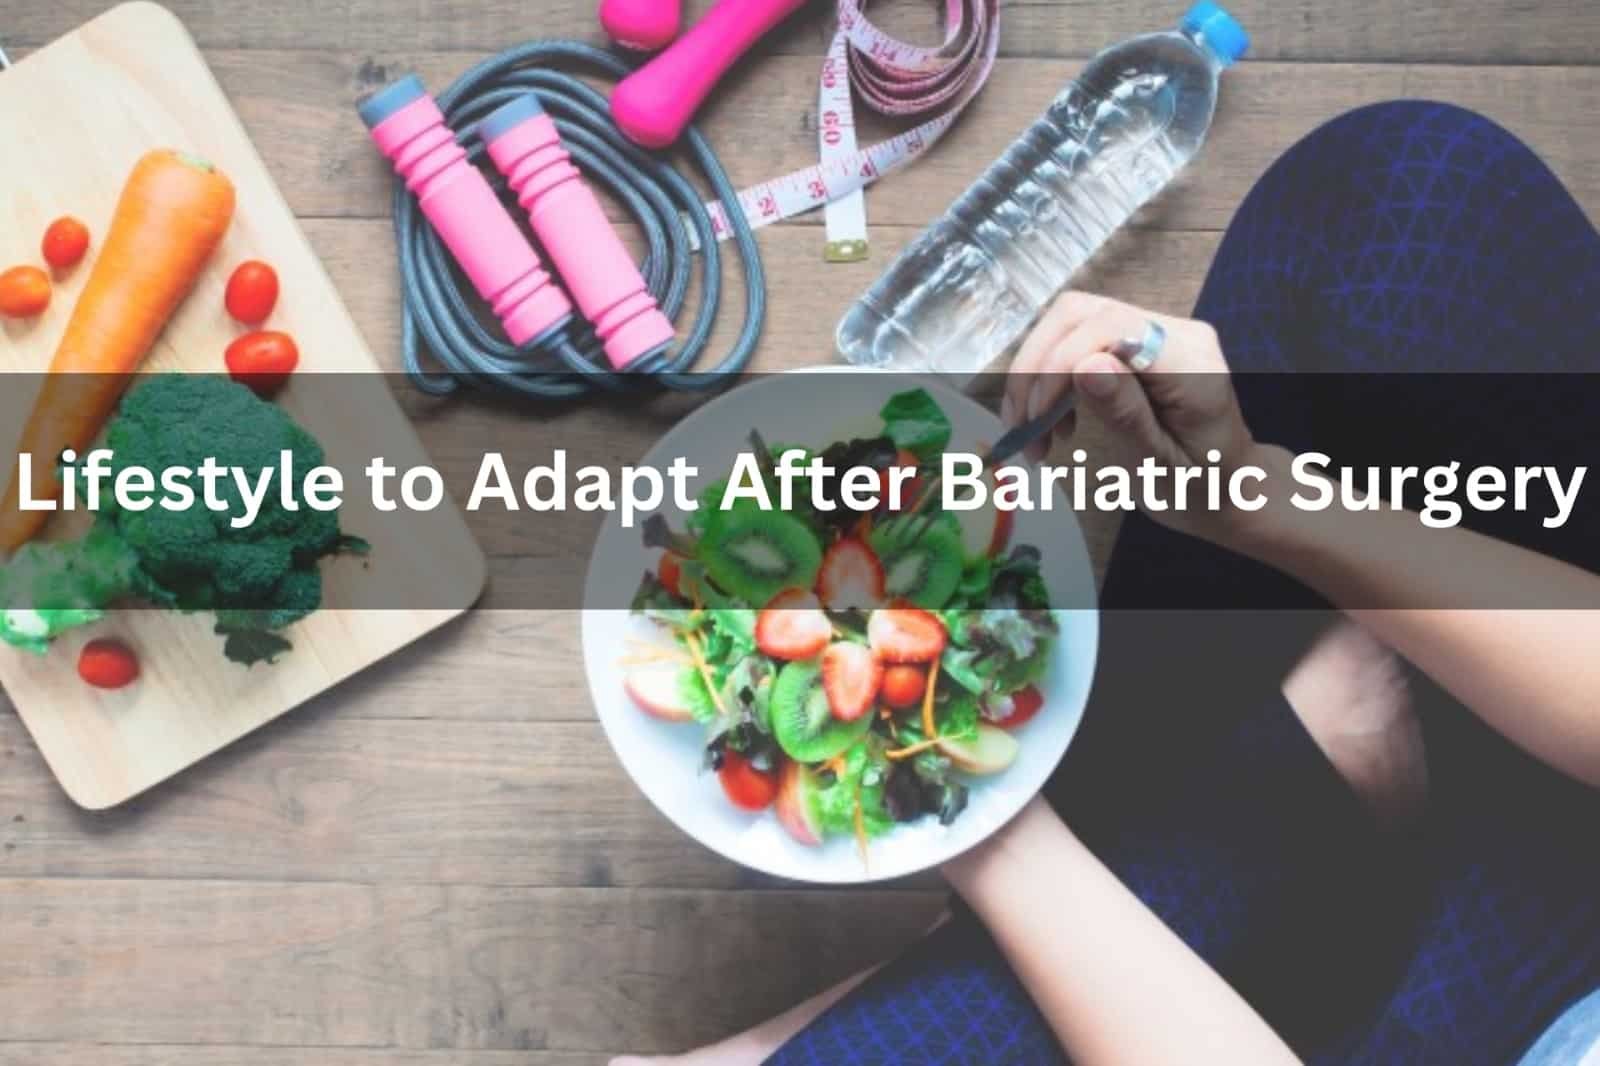 Lifestyle to Adapt After Bariatric Surgery